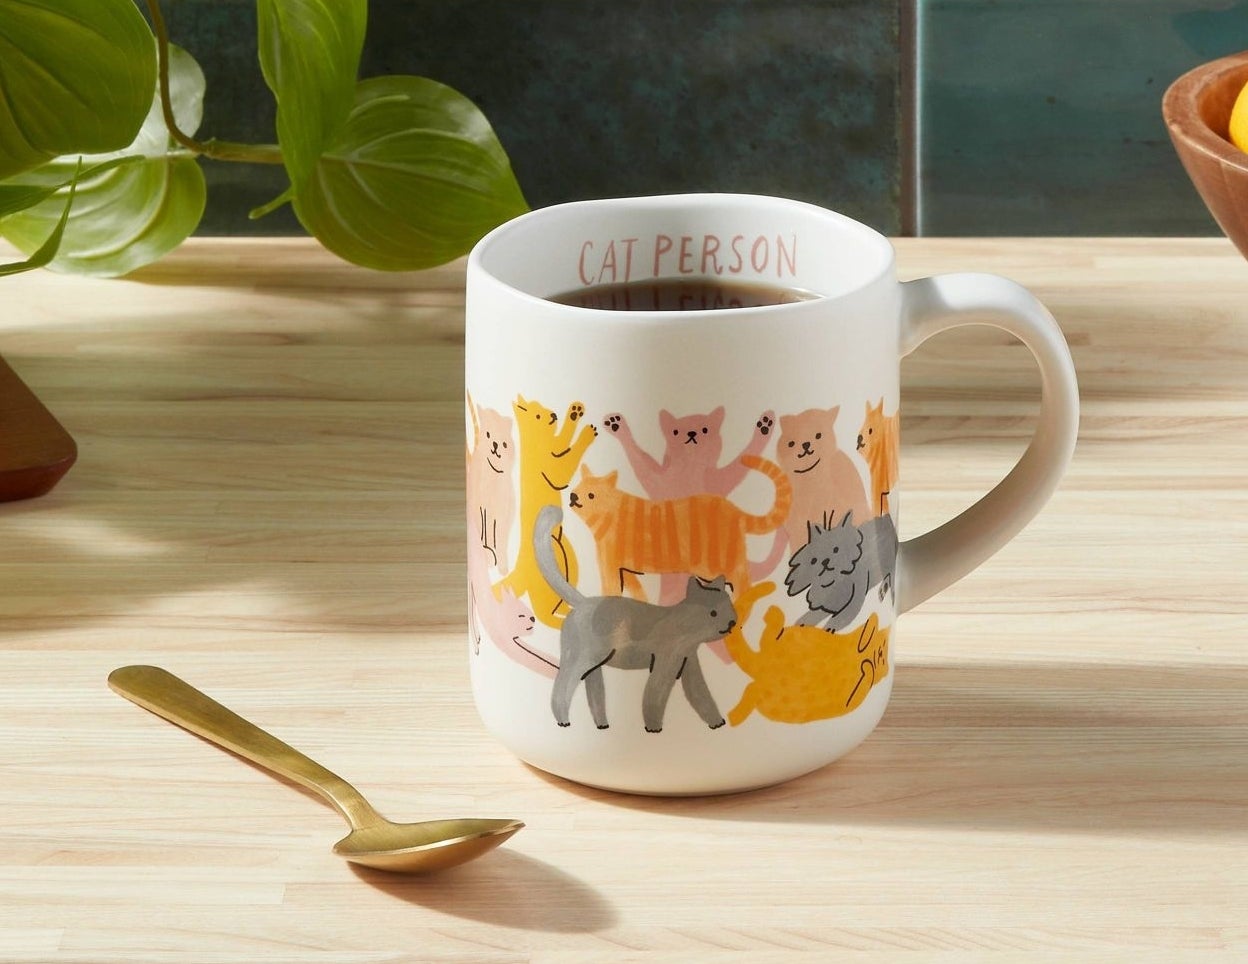 The white mug, featuring several kinds of cats in various colors